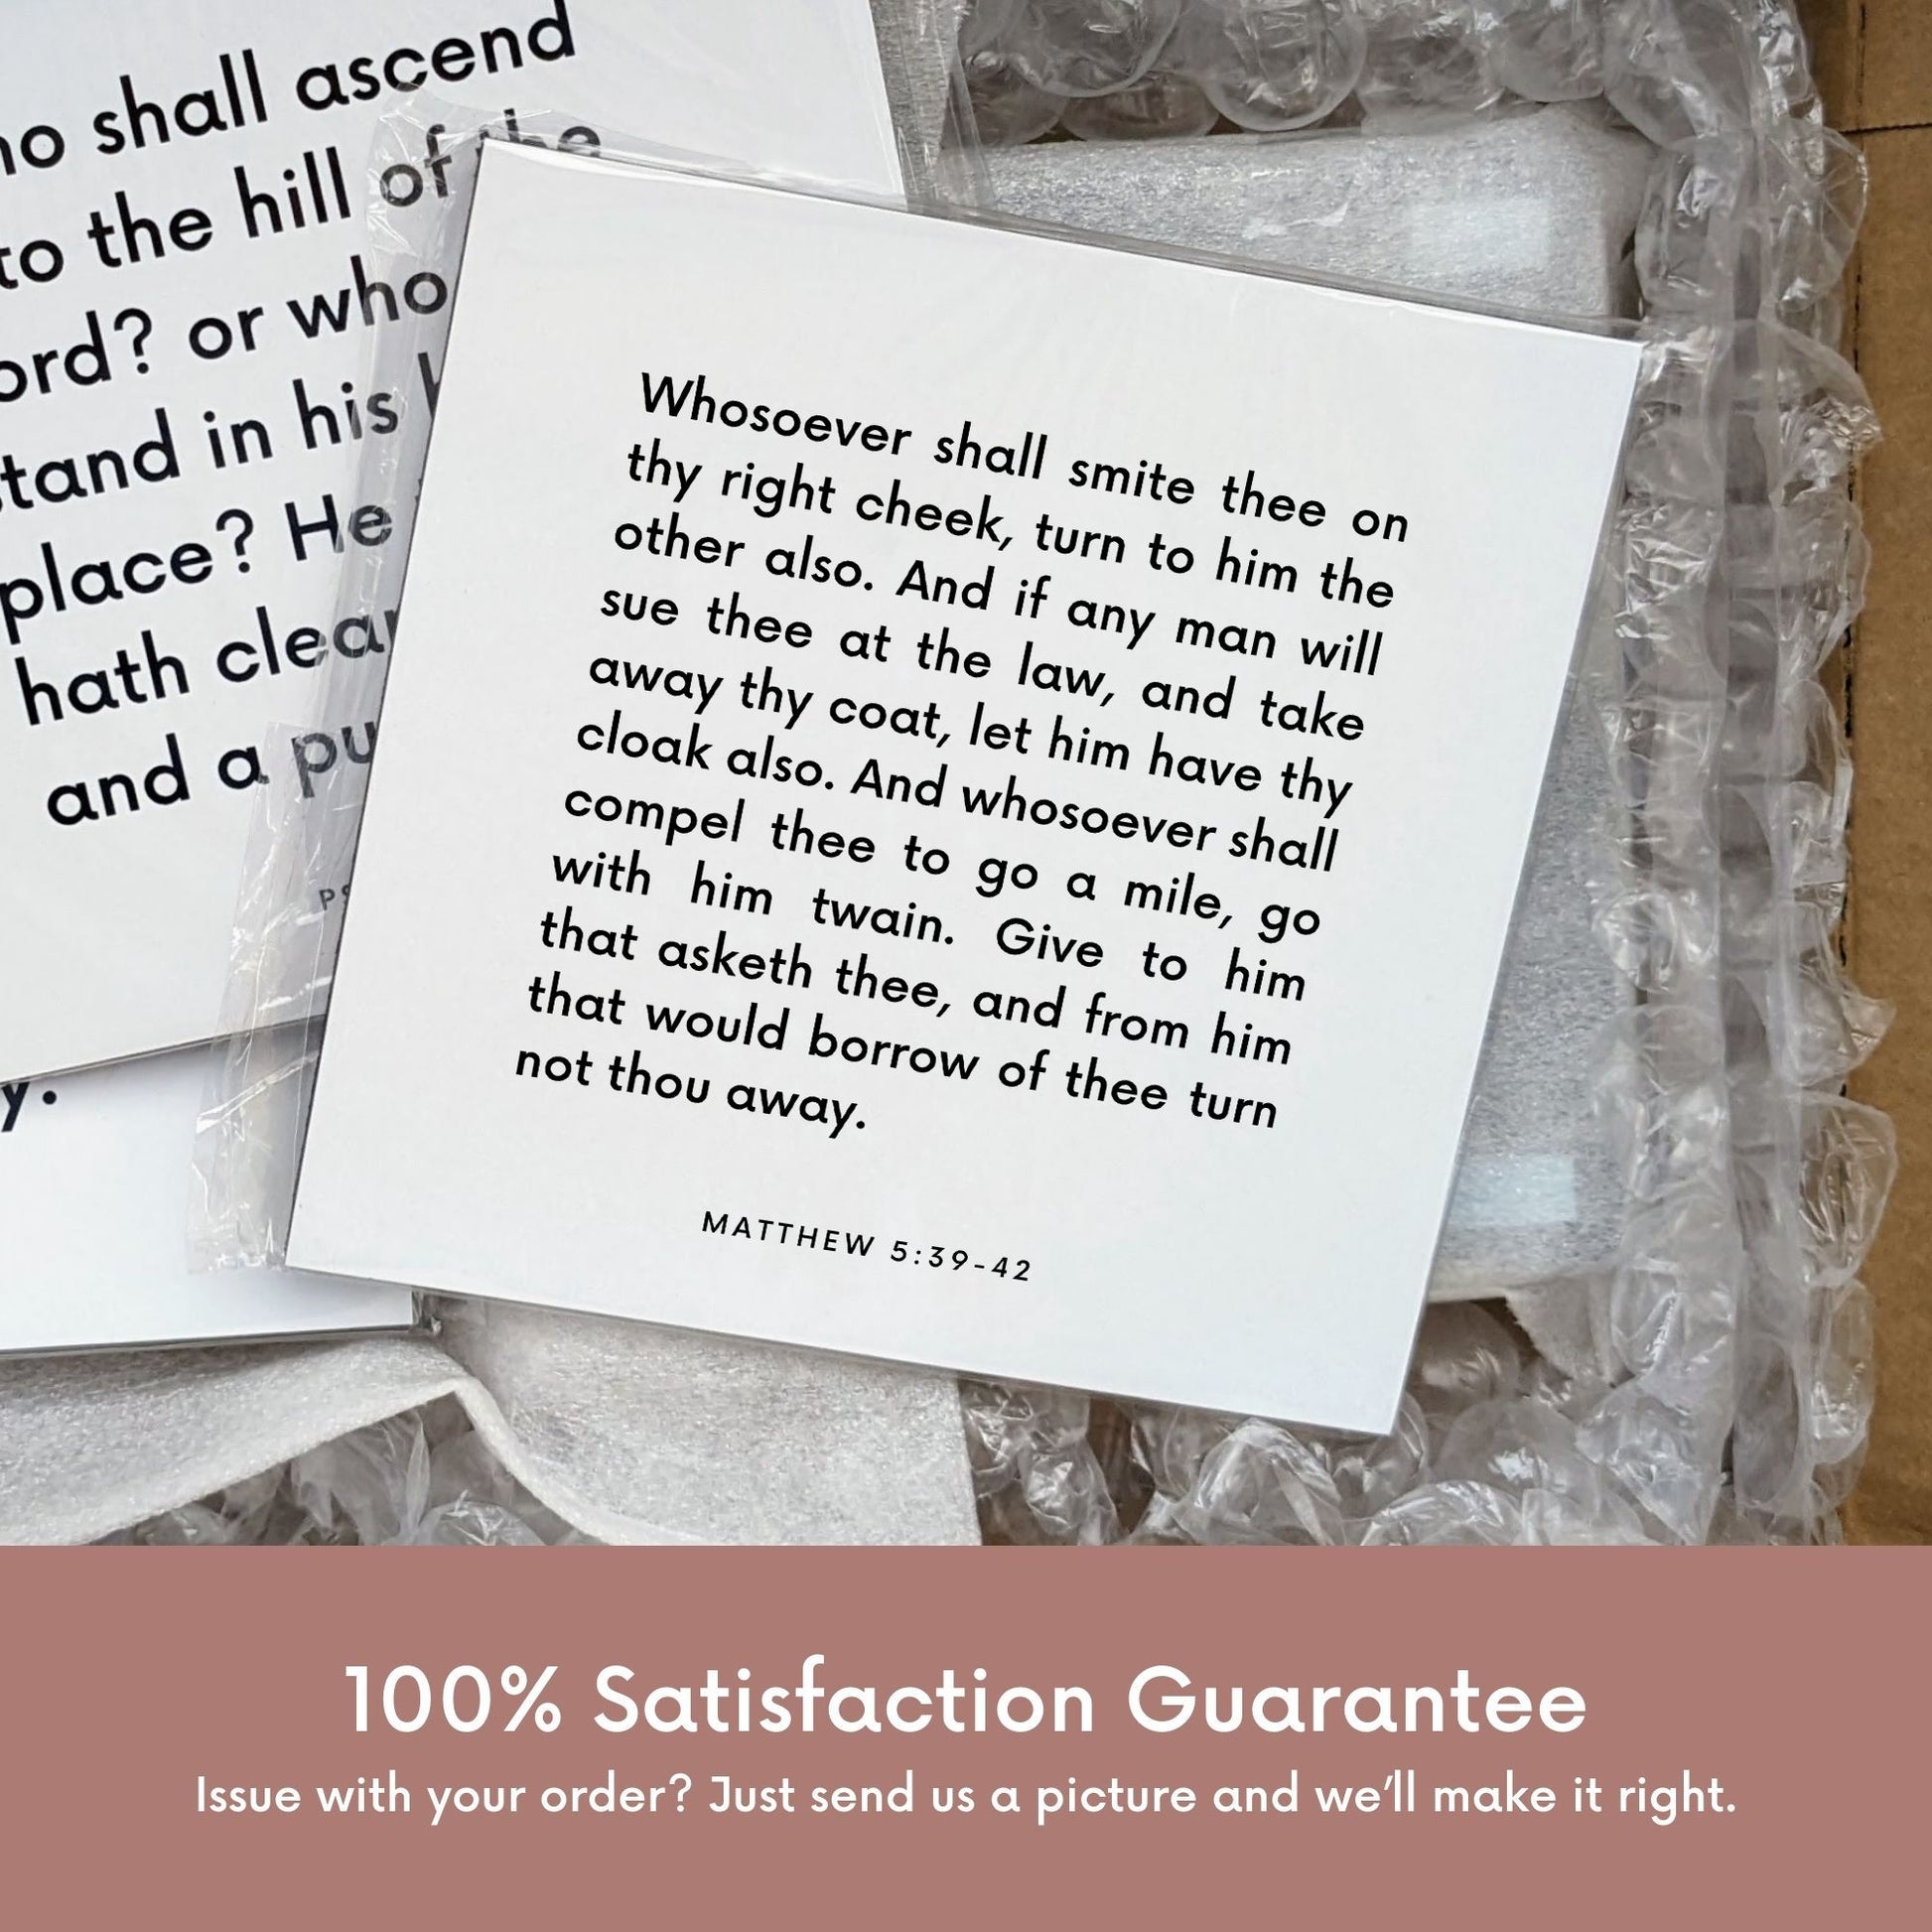 Shipping materials for scripture tile of Matthew 5:39-42 - "Whosoever shall smite thee on thy right cheek"